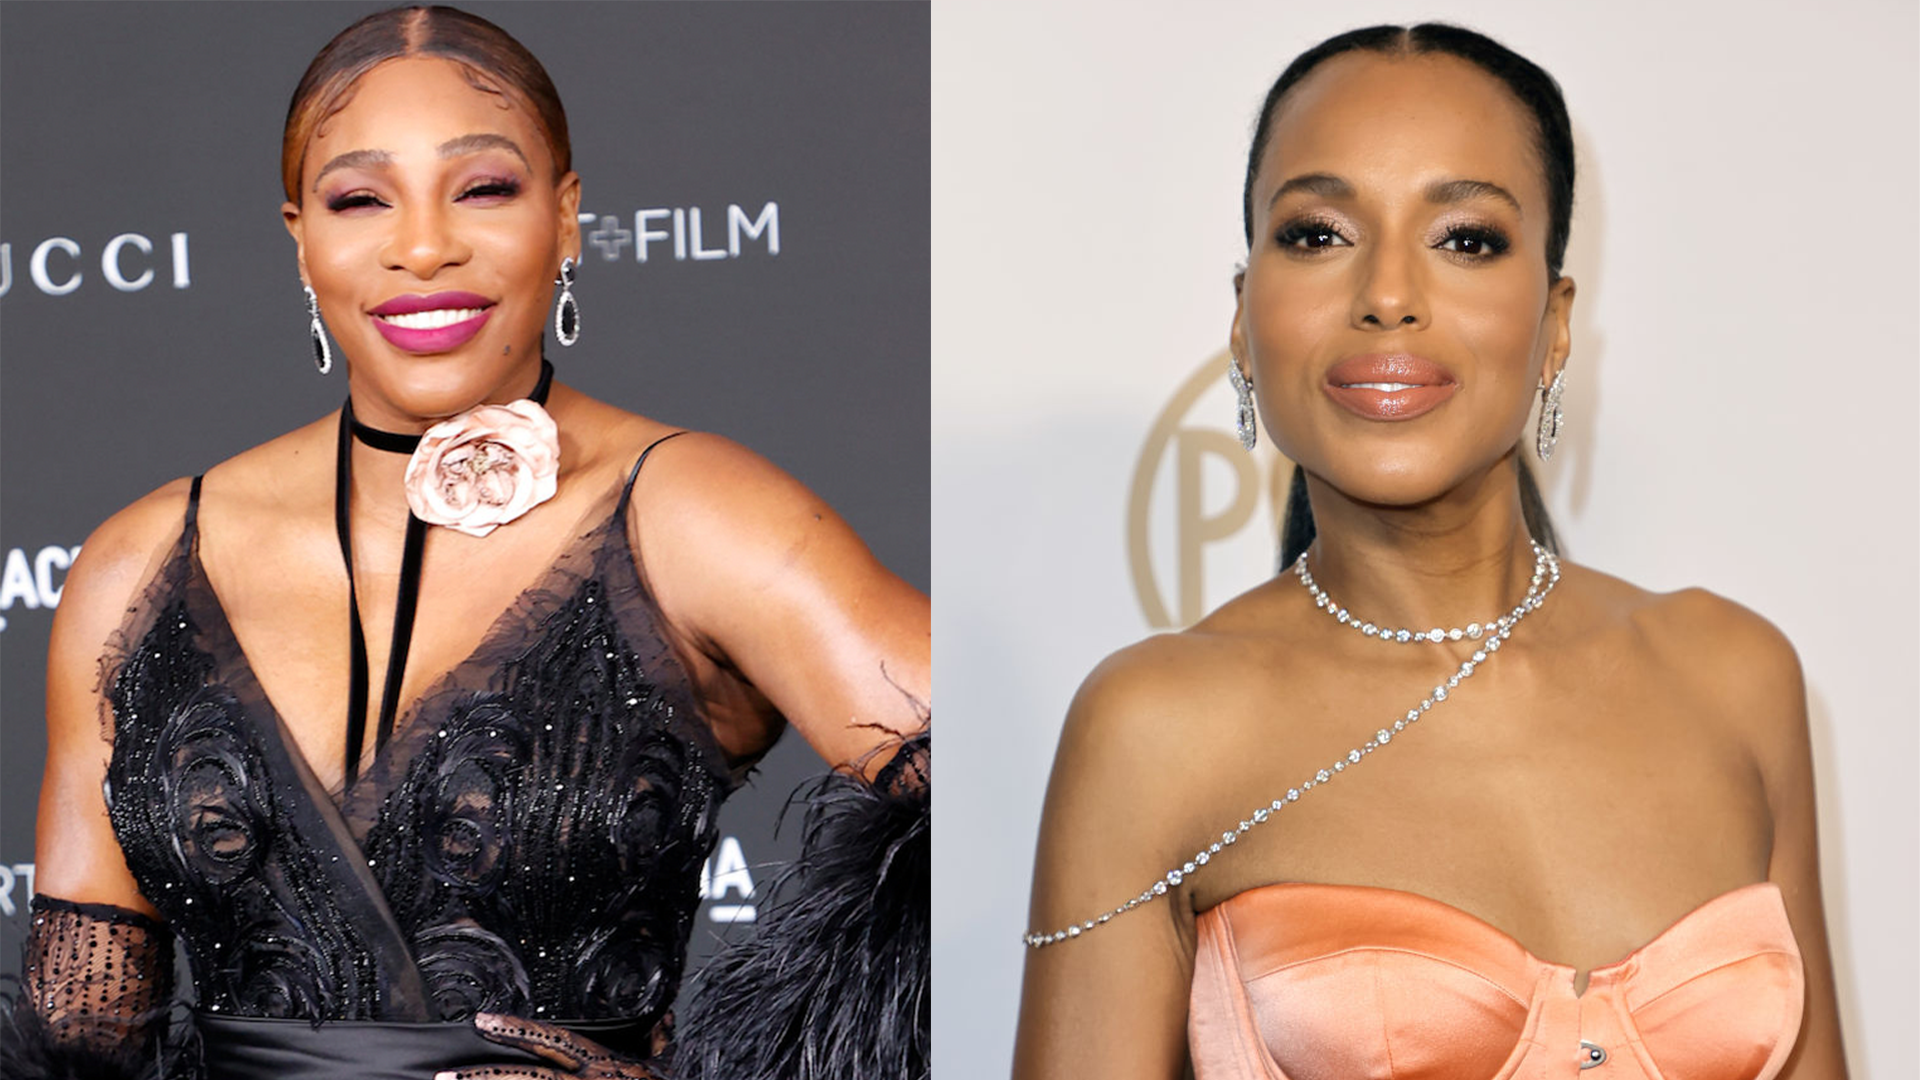 Serena Williams And Kerry Washington Have Some Advice For Achieving Financial Freedom